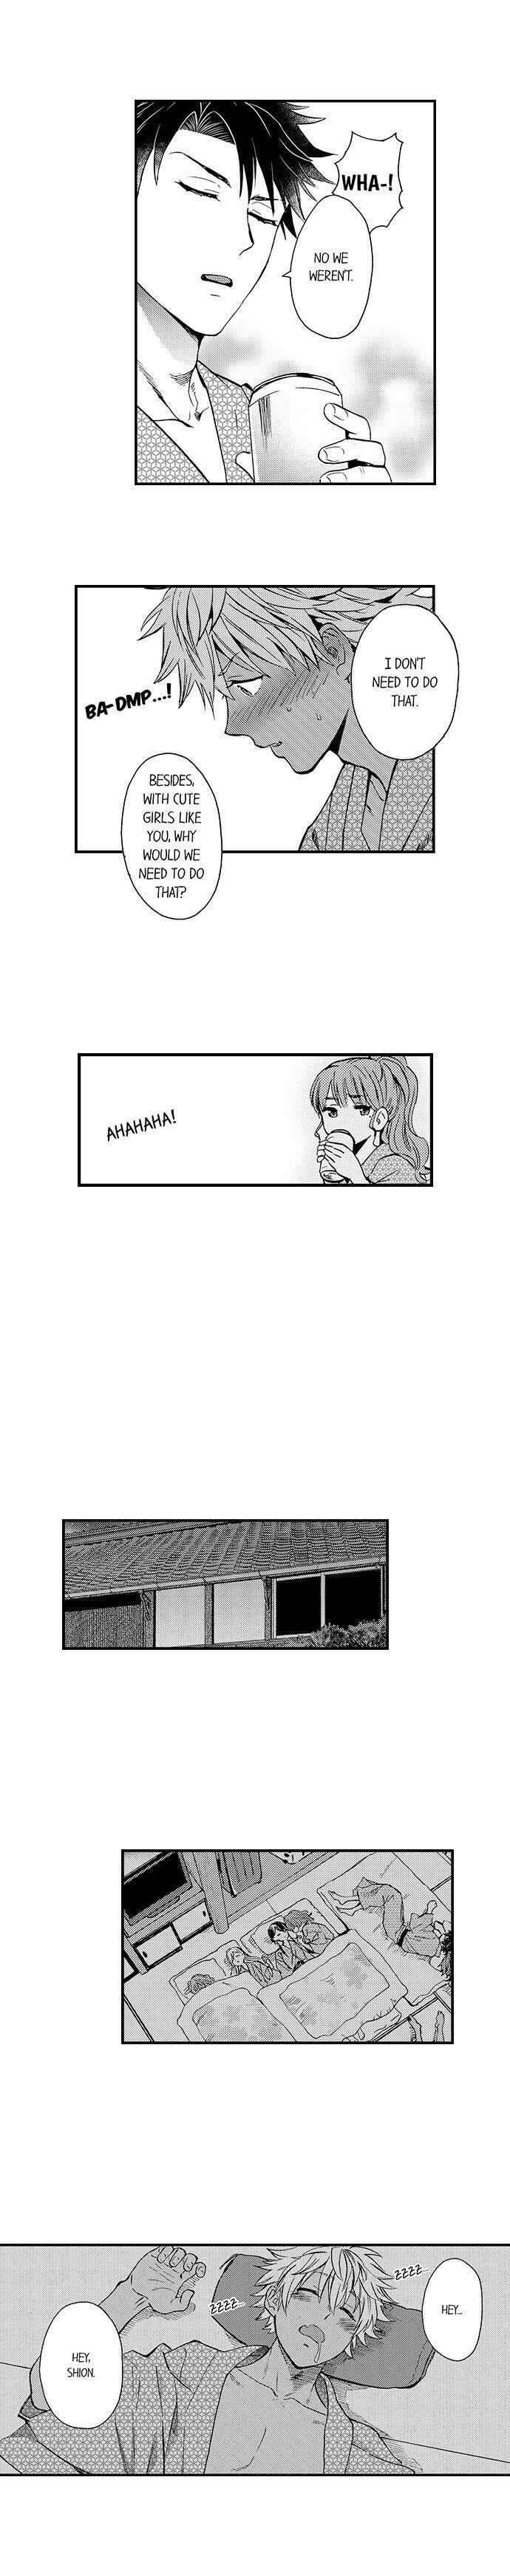 Fucked By My Best Friend - Page 4